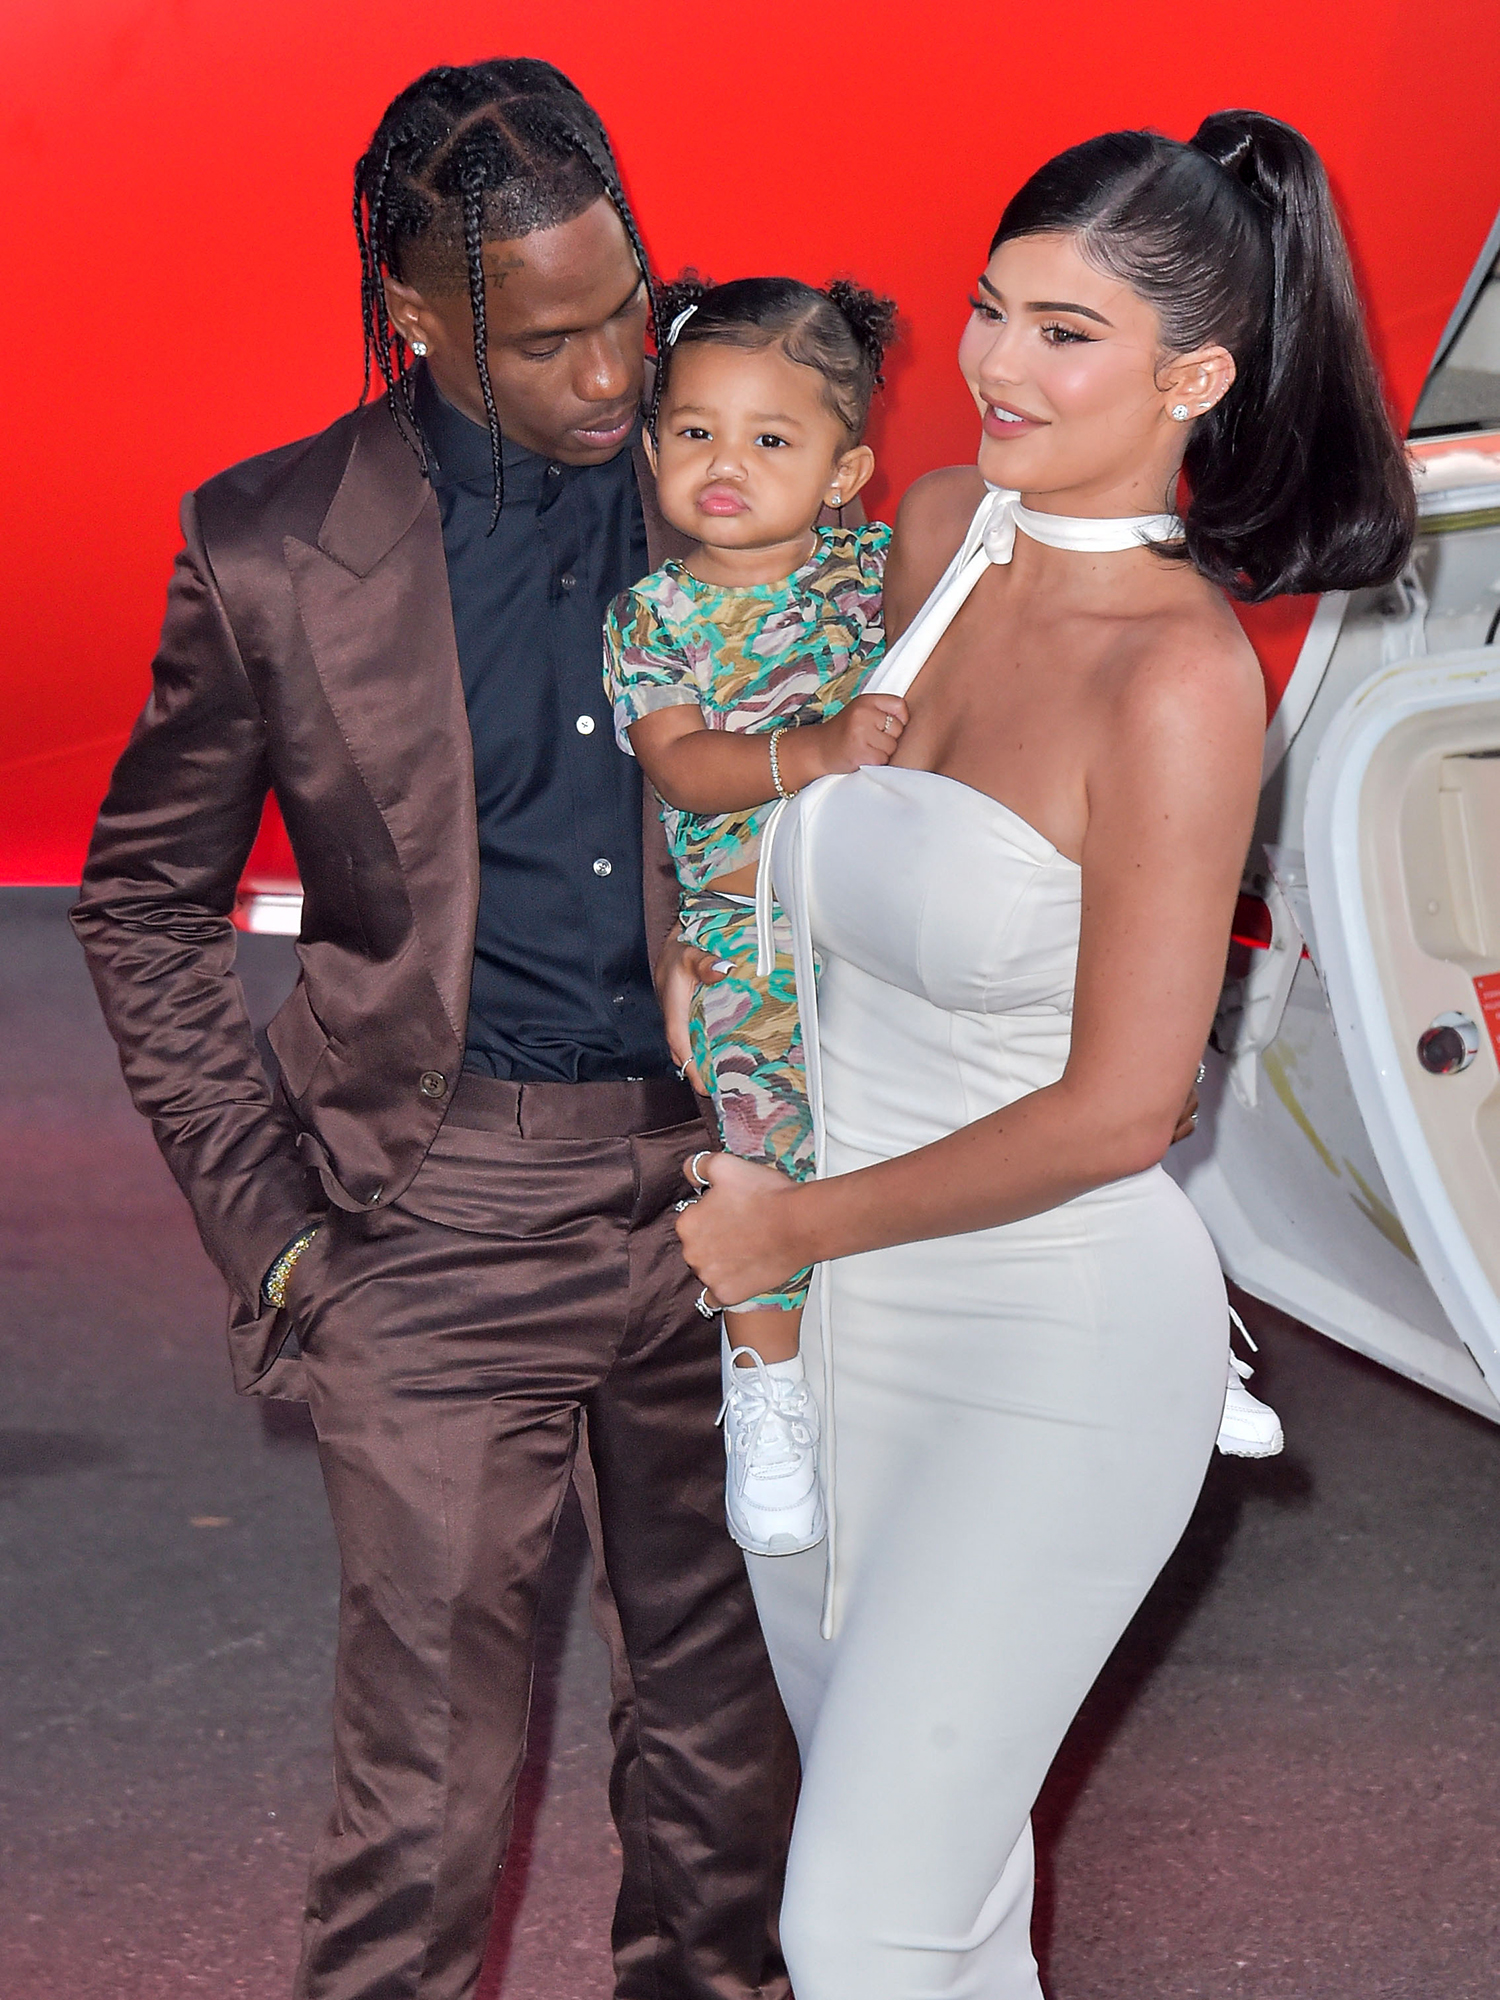 Kylie Jenner and Stormi, 4, Support Travis Scott at London Concert: 'A Moment I Can't Forget'